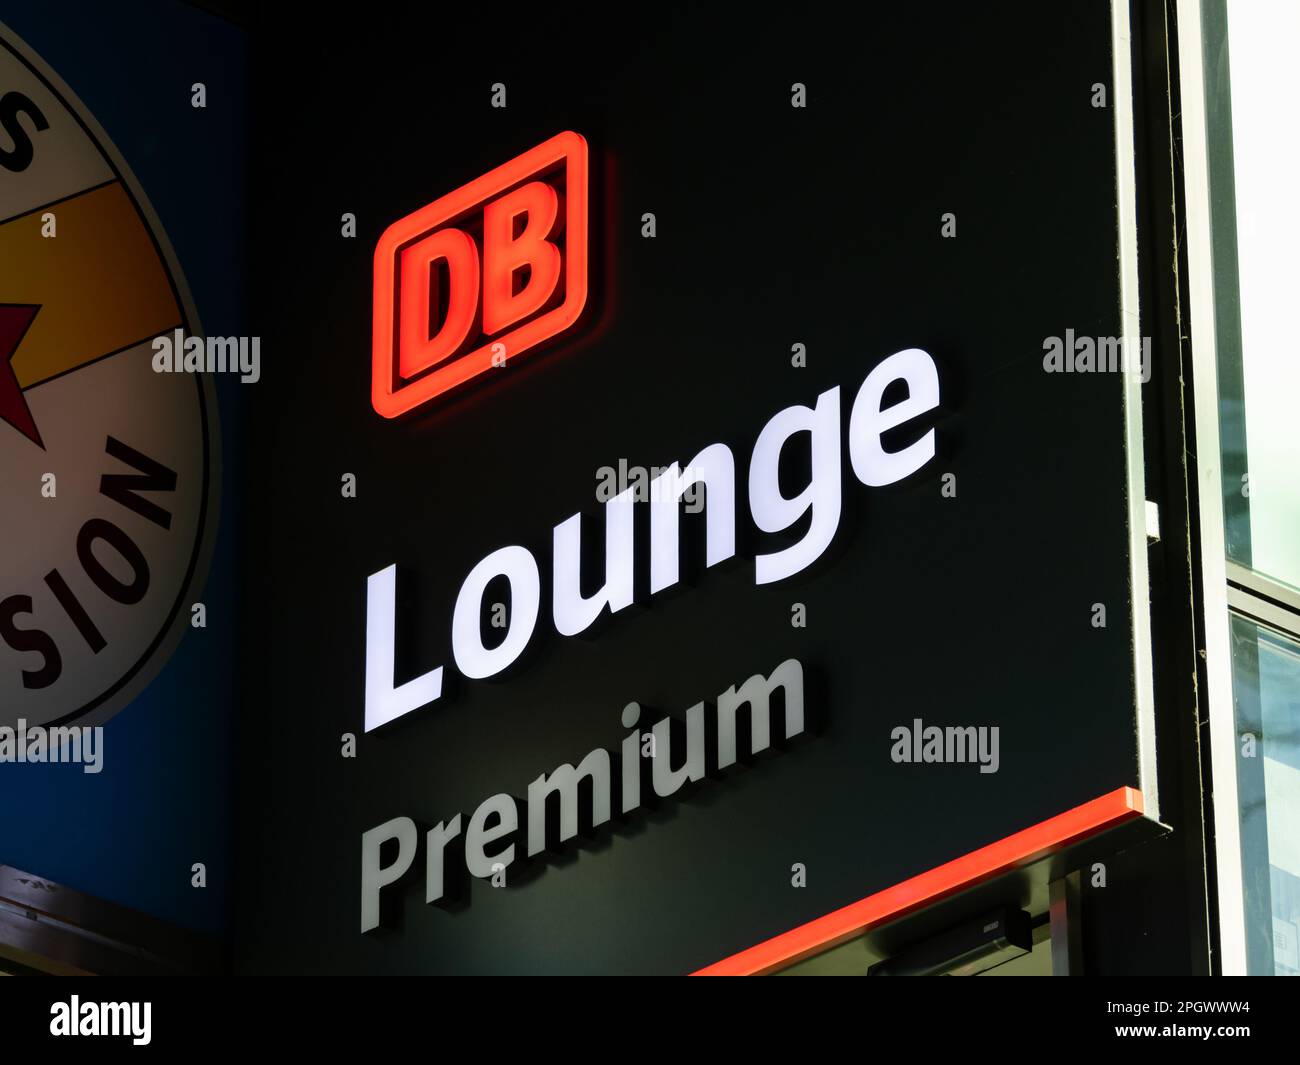 DB Lounge Premium of the Deutsche Bahn company. Comfortable waiting areas for people travelling with 1st class benefits. The logo is illuminated. Stock Photo